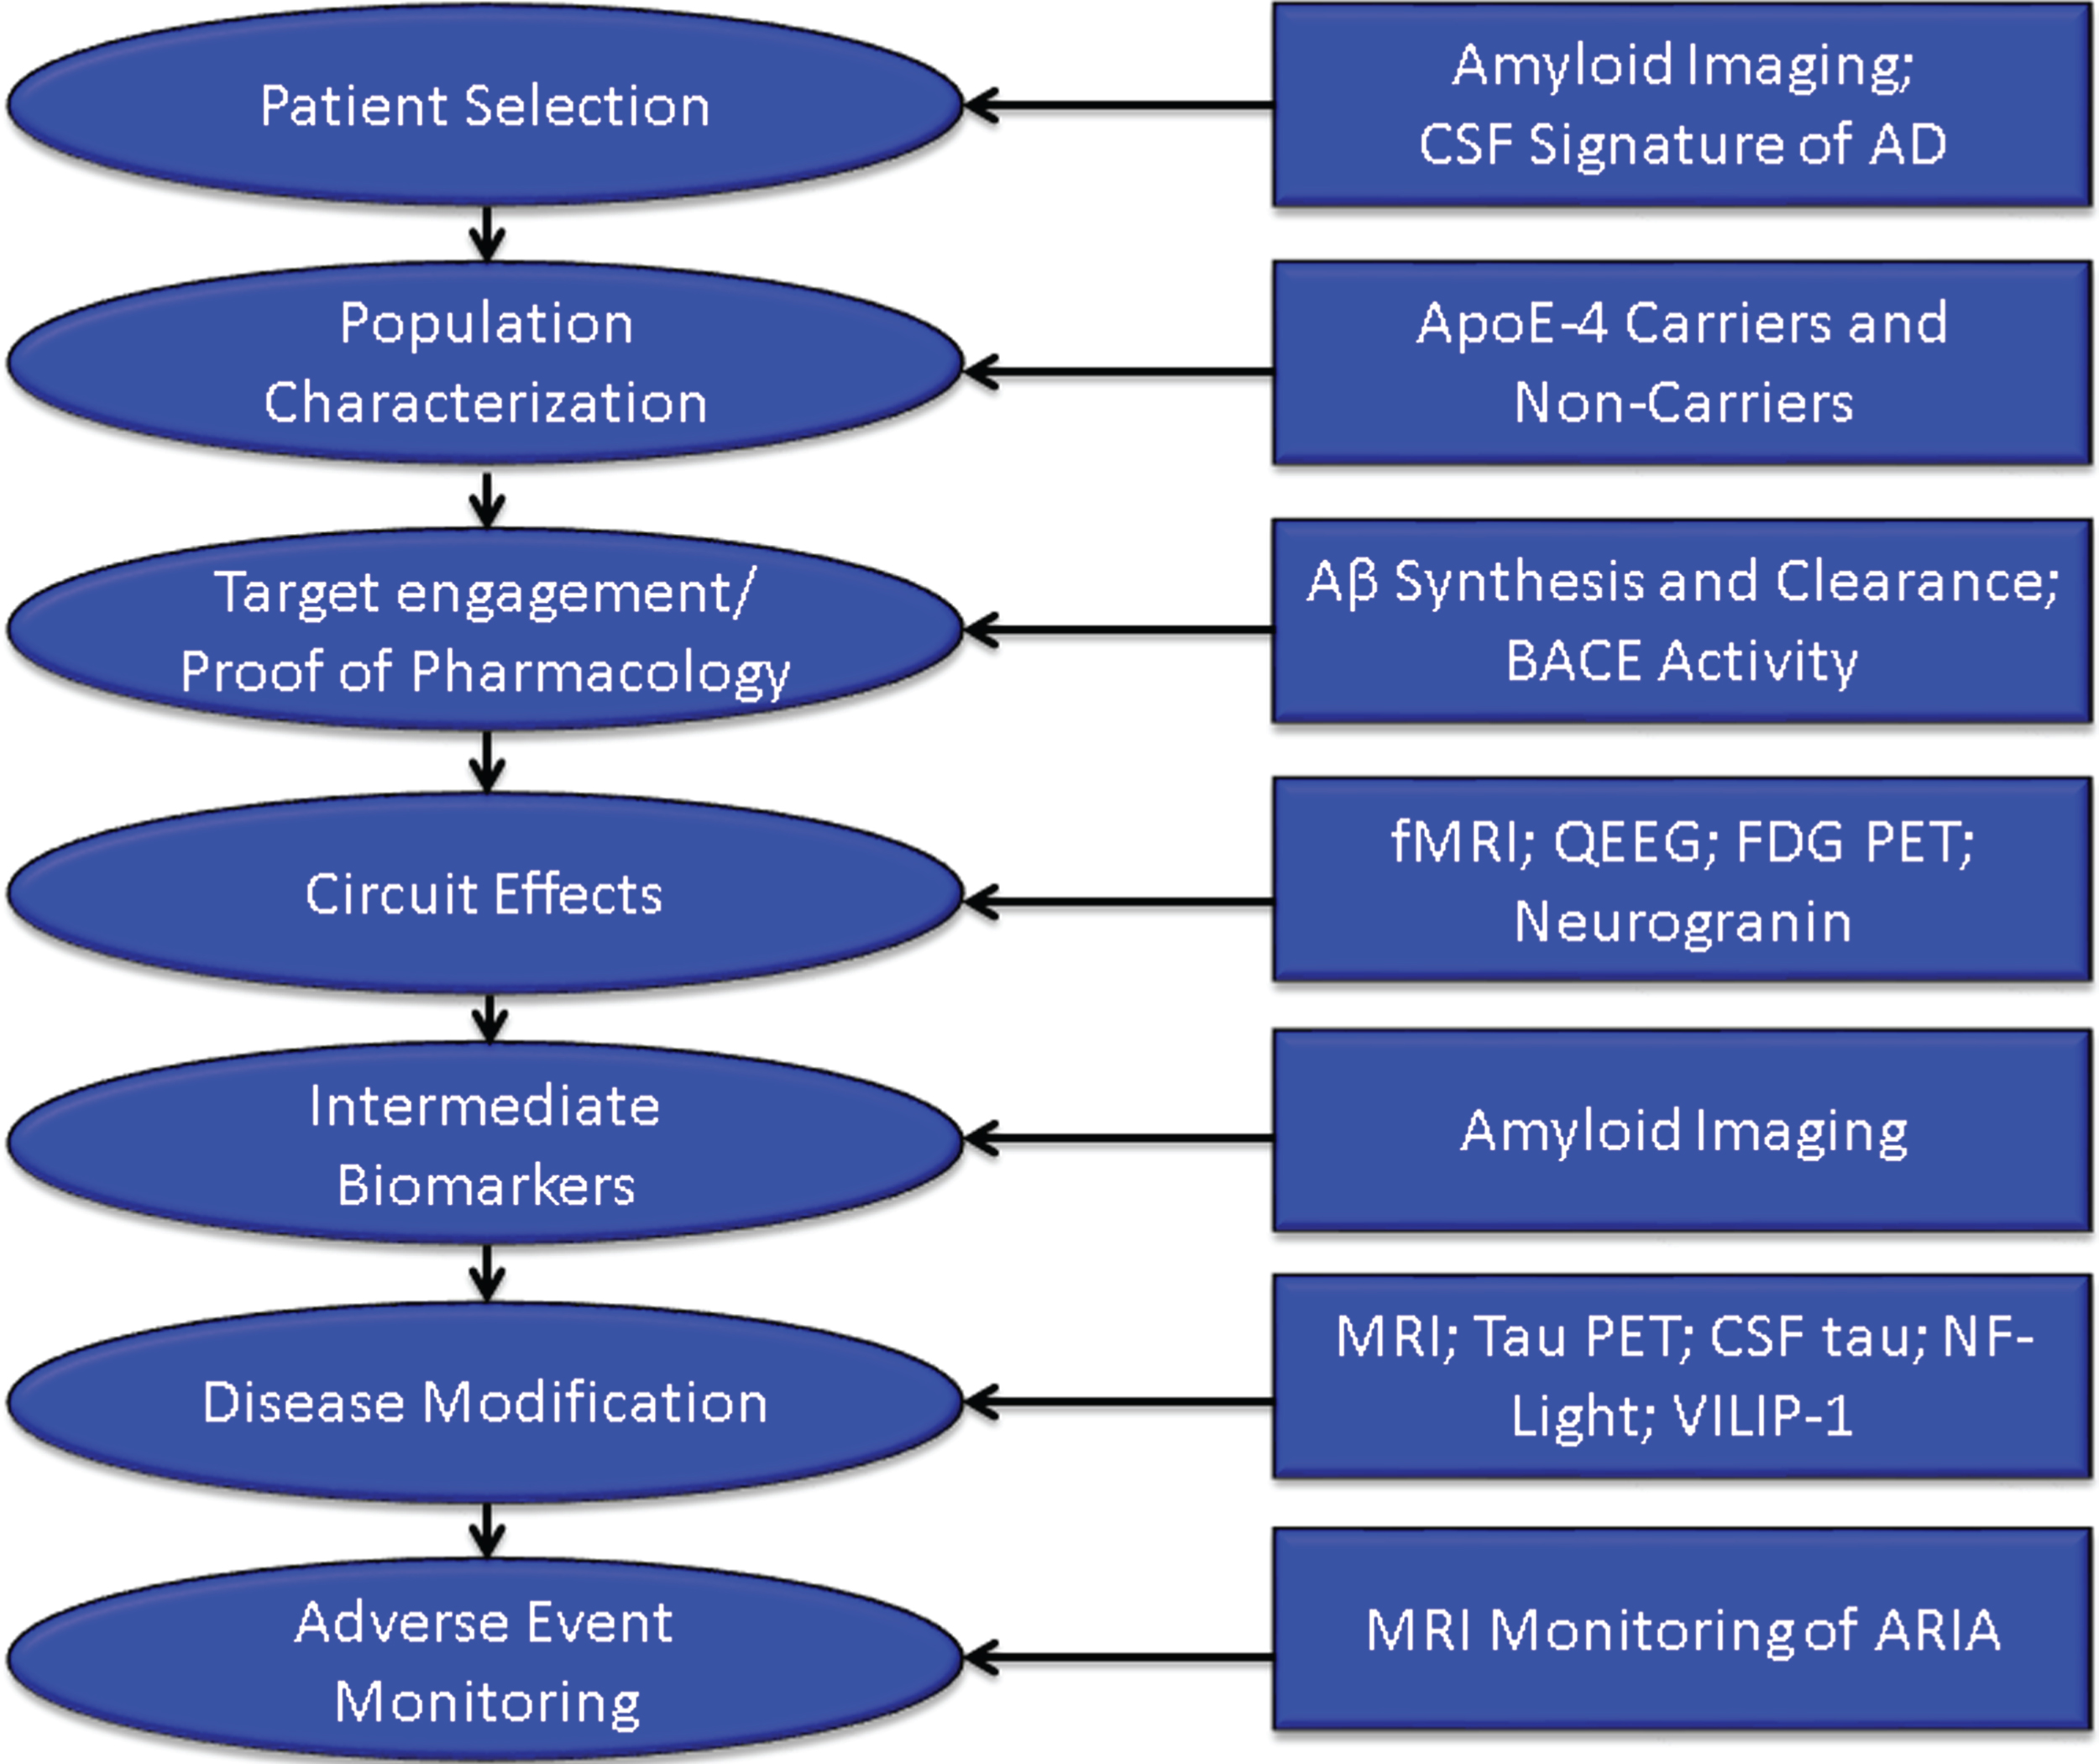 Roles of biomarkers in Phase II of drug development (BACE inhibition is included as an example of one type of target engagement biomarker; each drug mechanism will have a corresponding target engagement/proof of pharmacology biomarker), CSF, cerebrospinal fluid; AD, Alzheimer’s disease; fMRI, functional magnetic resonance imaging; QEEG, quantitative electroencephalography; FDG PET, fluorodeoxyglucose positron emission tomography; NF-light, neurofilament light chain protein; ARIA, amyloid-related imaging abnormalities.